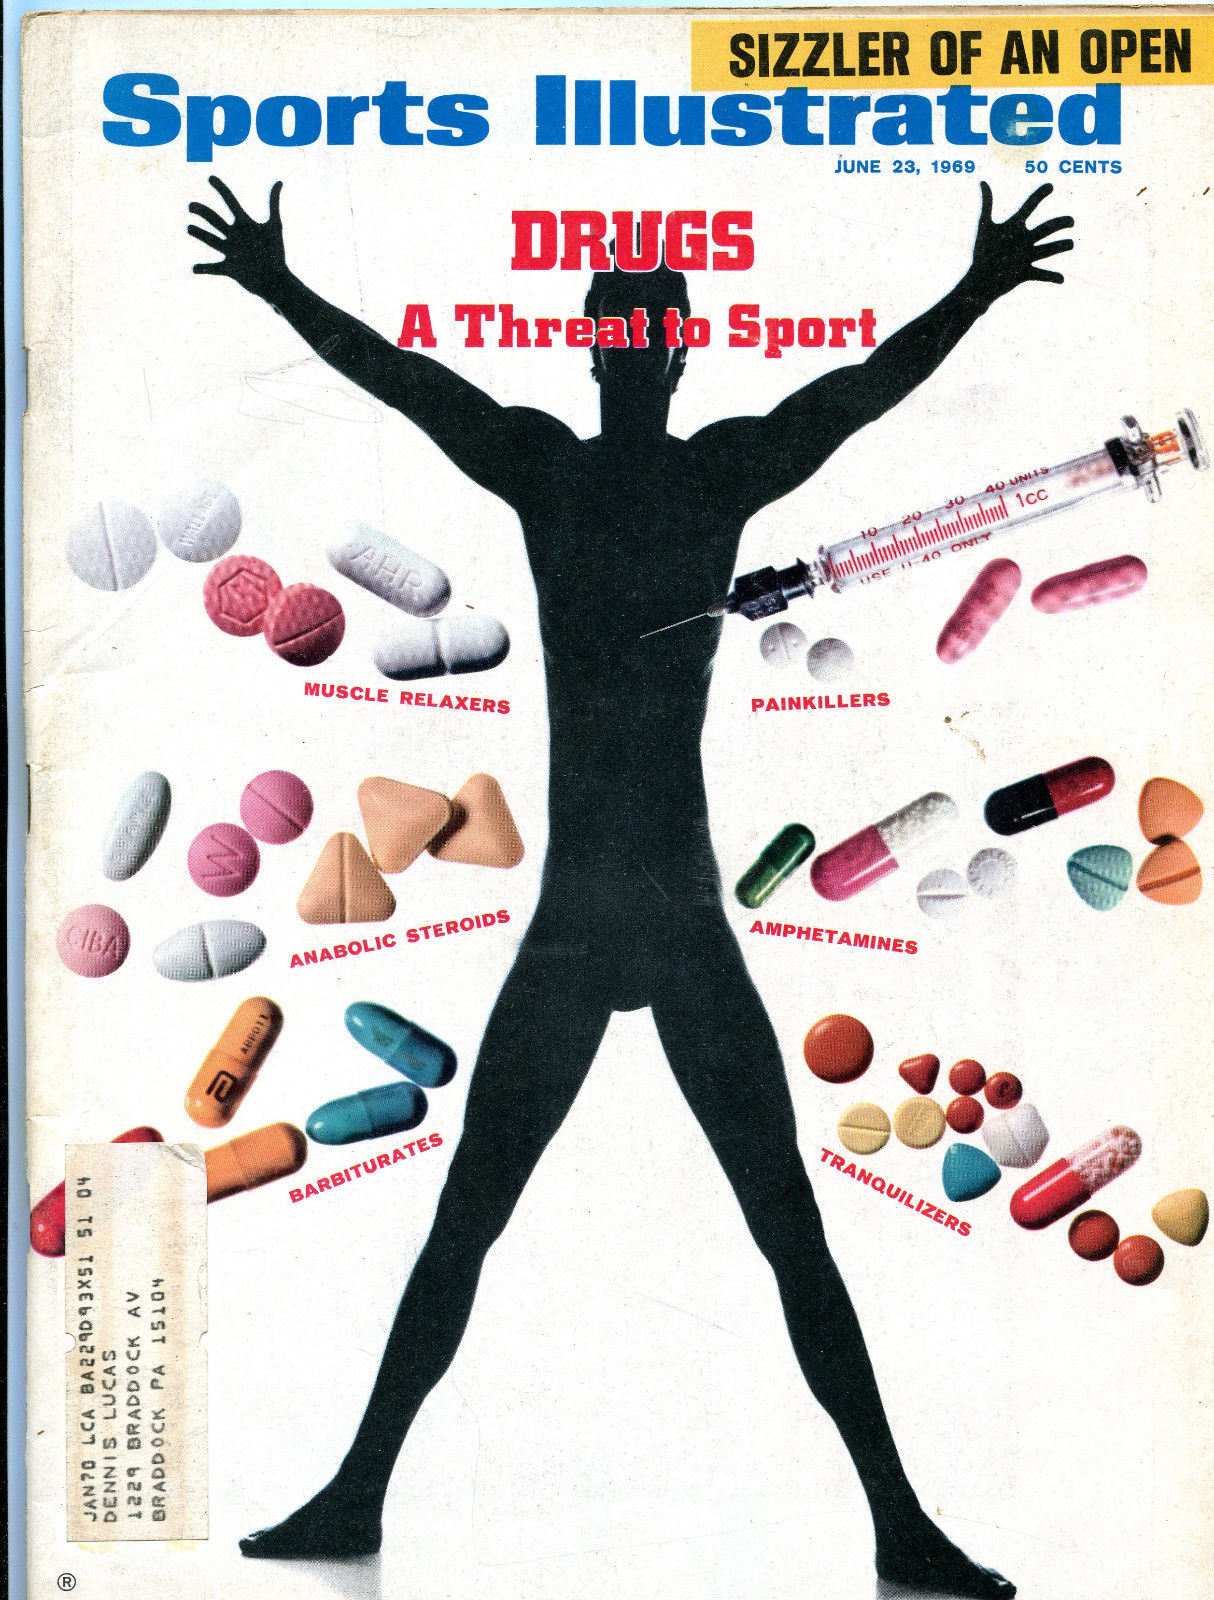 1969 Sports Illustrated cover 'Drugs: A Threat to Sport.'